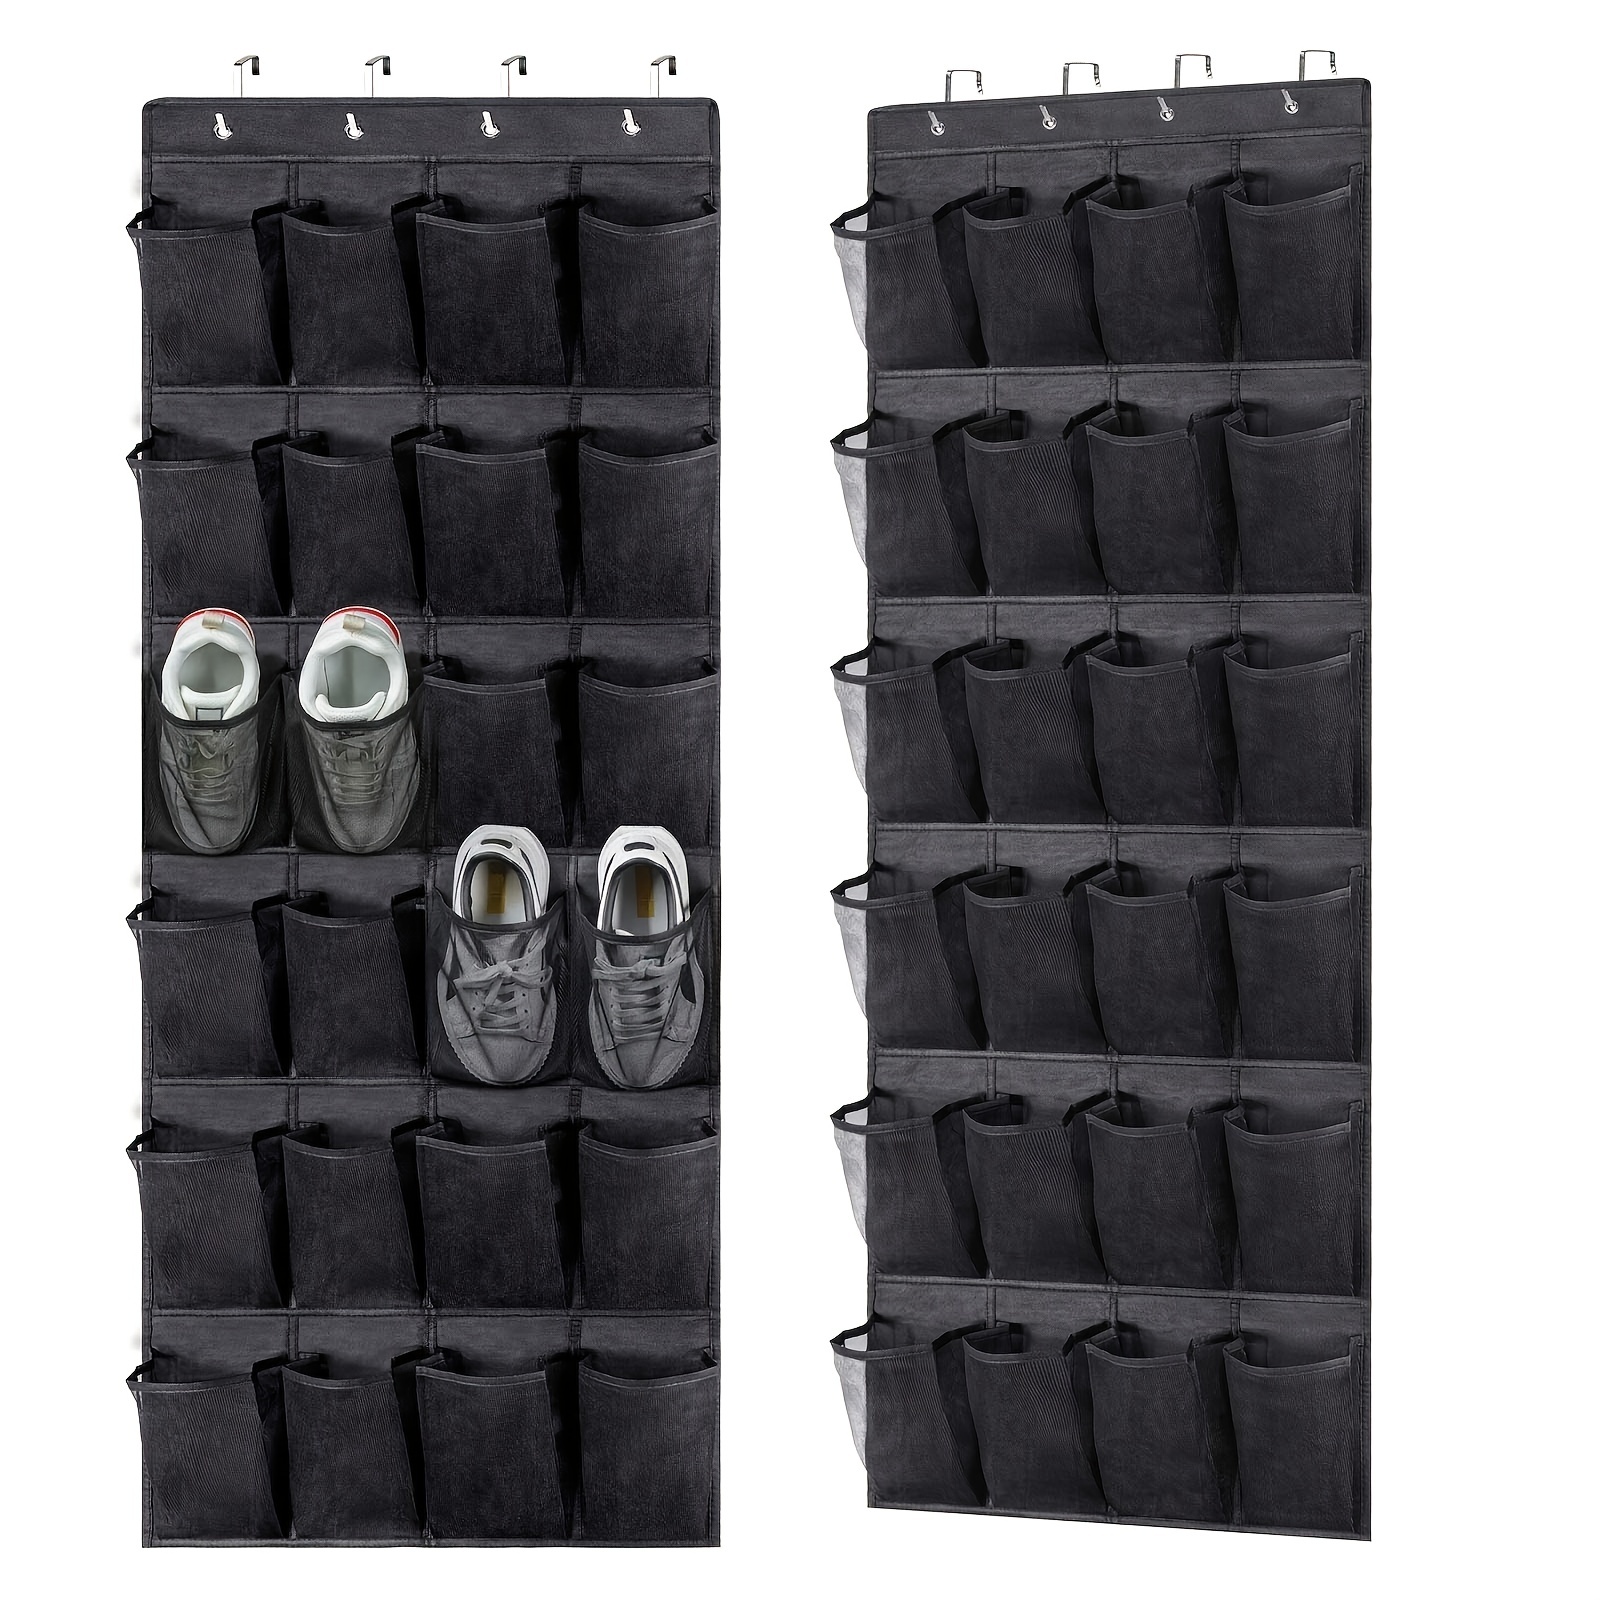 

1pc Over The Door Shoe Organizer Hanging Closet Holder Hanger Storage Bag Rack With 24 Large Mesh Pockets For Retail Stores, Boutique, Supermarkets